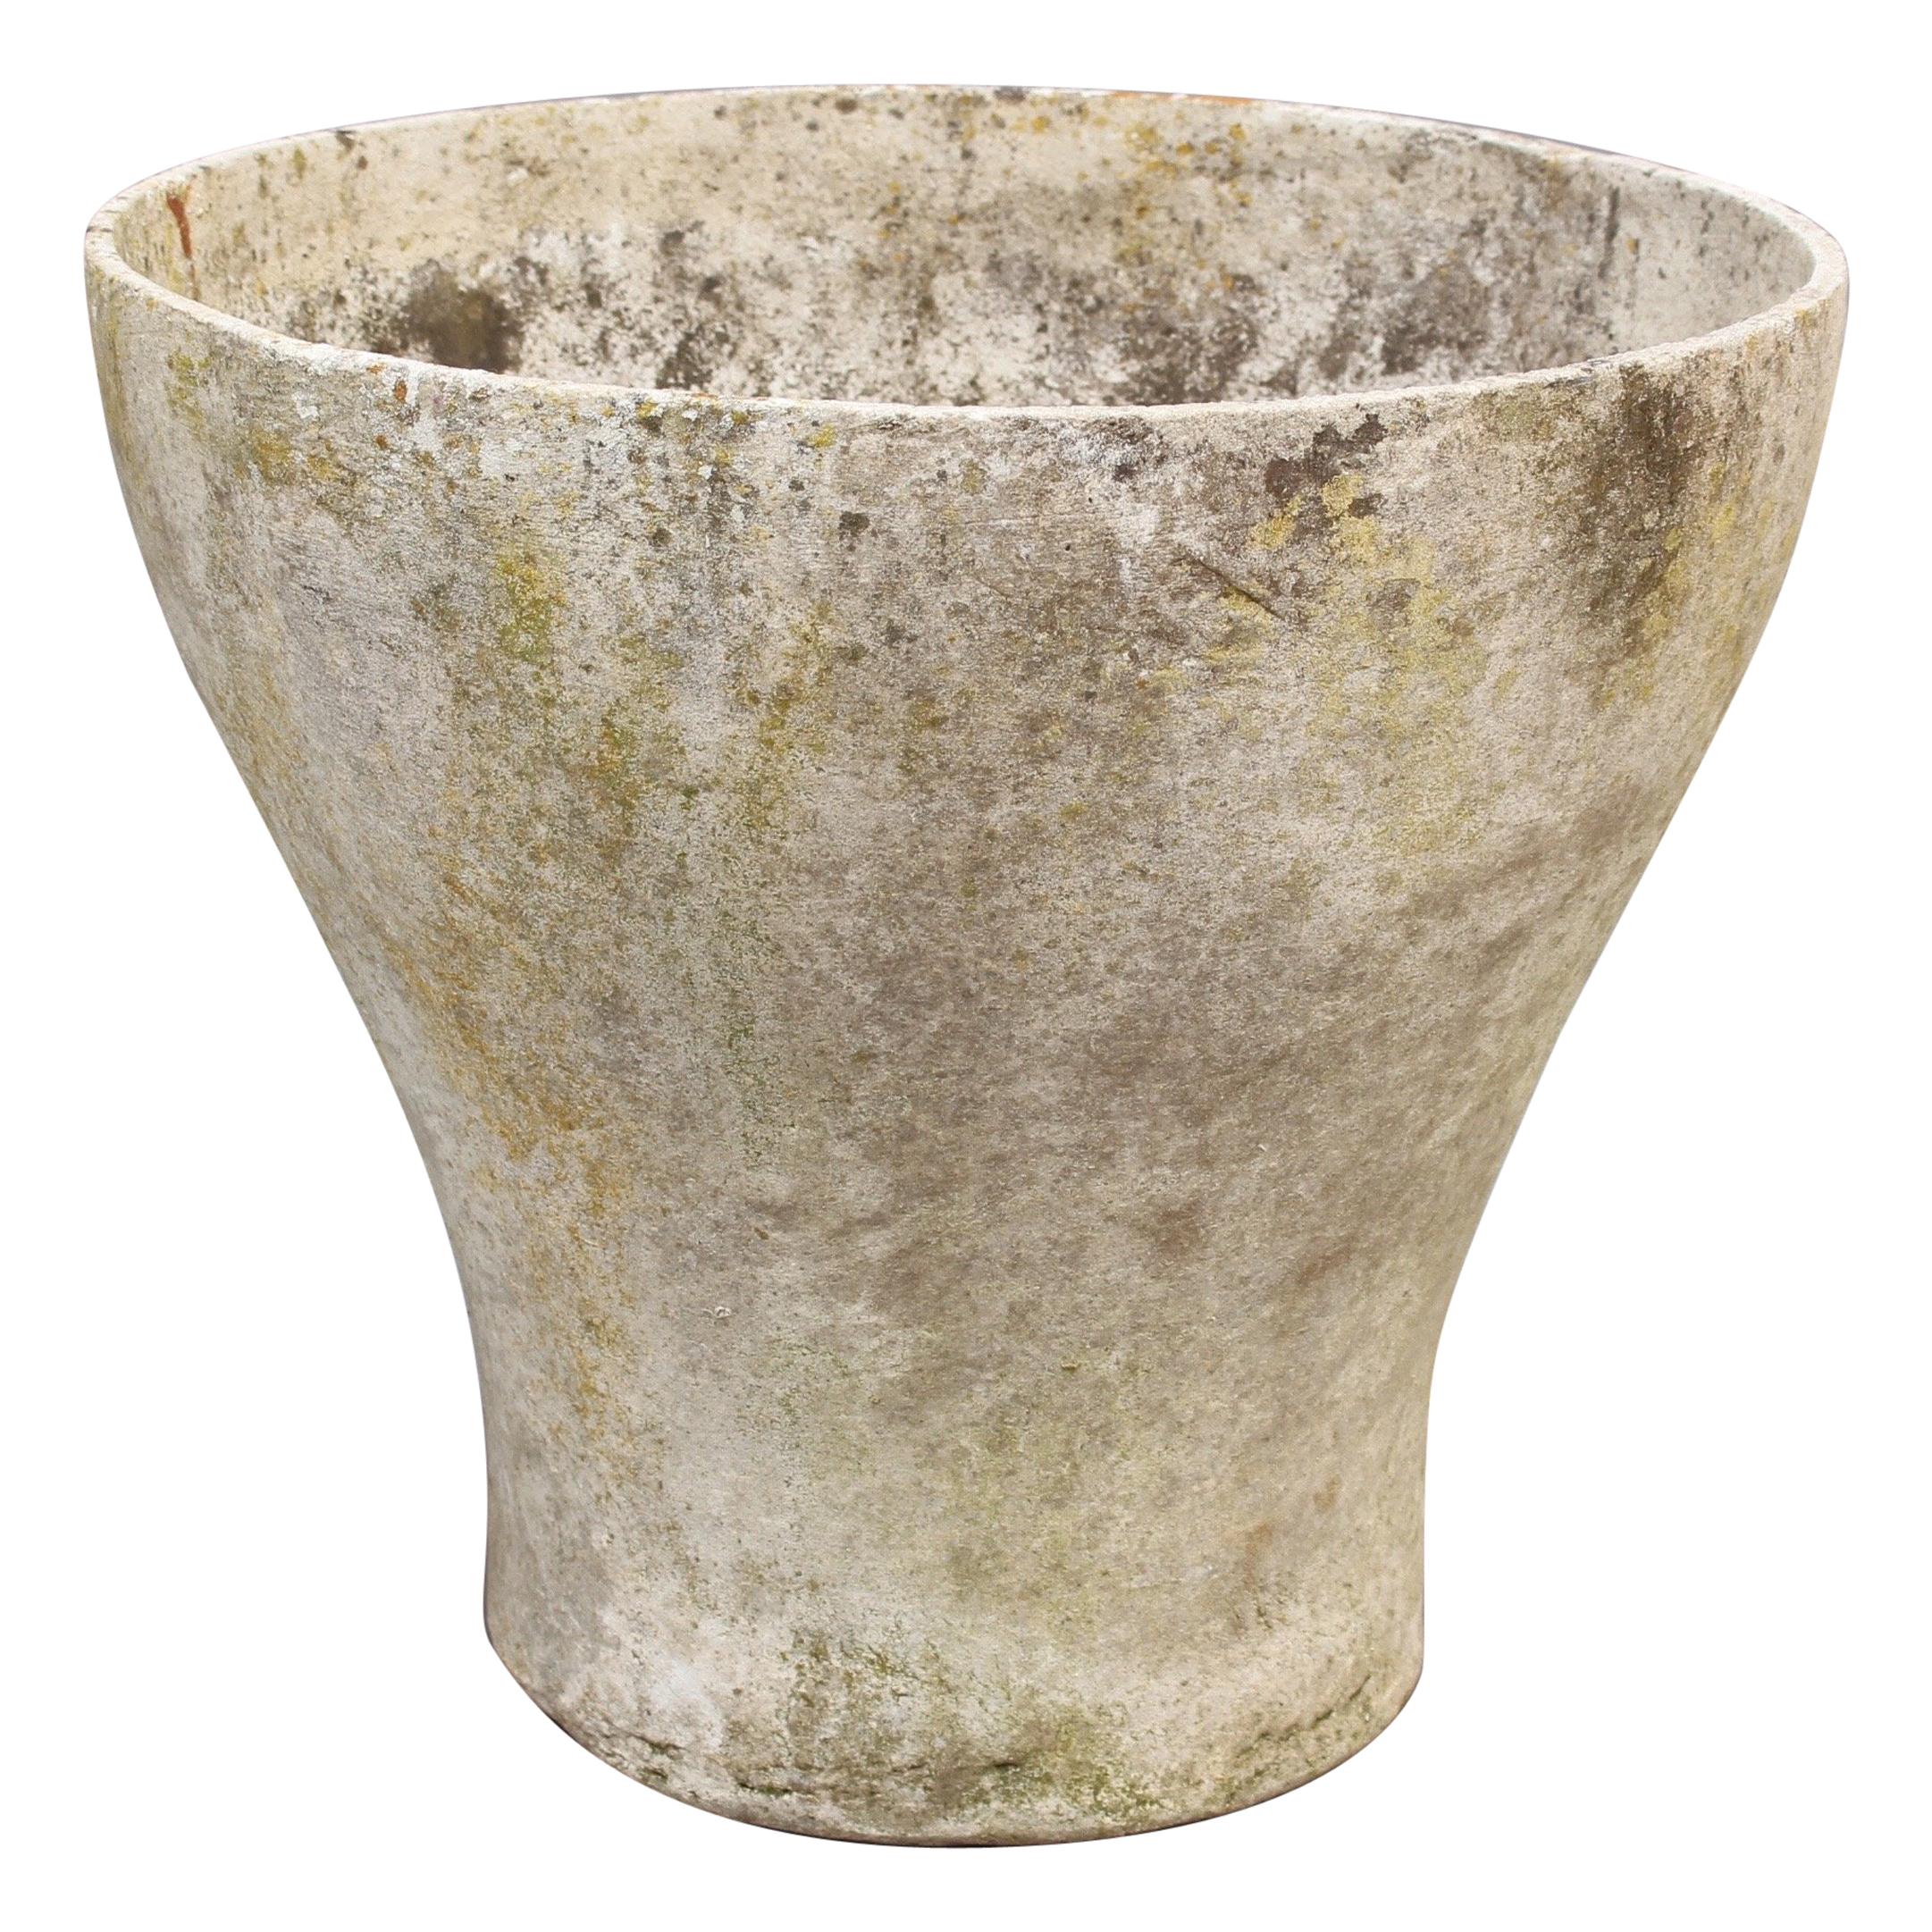 Goblet-Shaped Planter Attributed to Willy Guhl for Eternit, circa 1960s